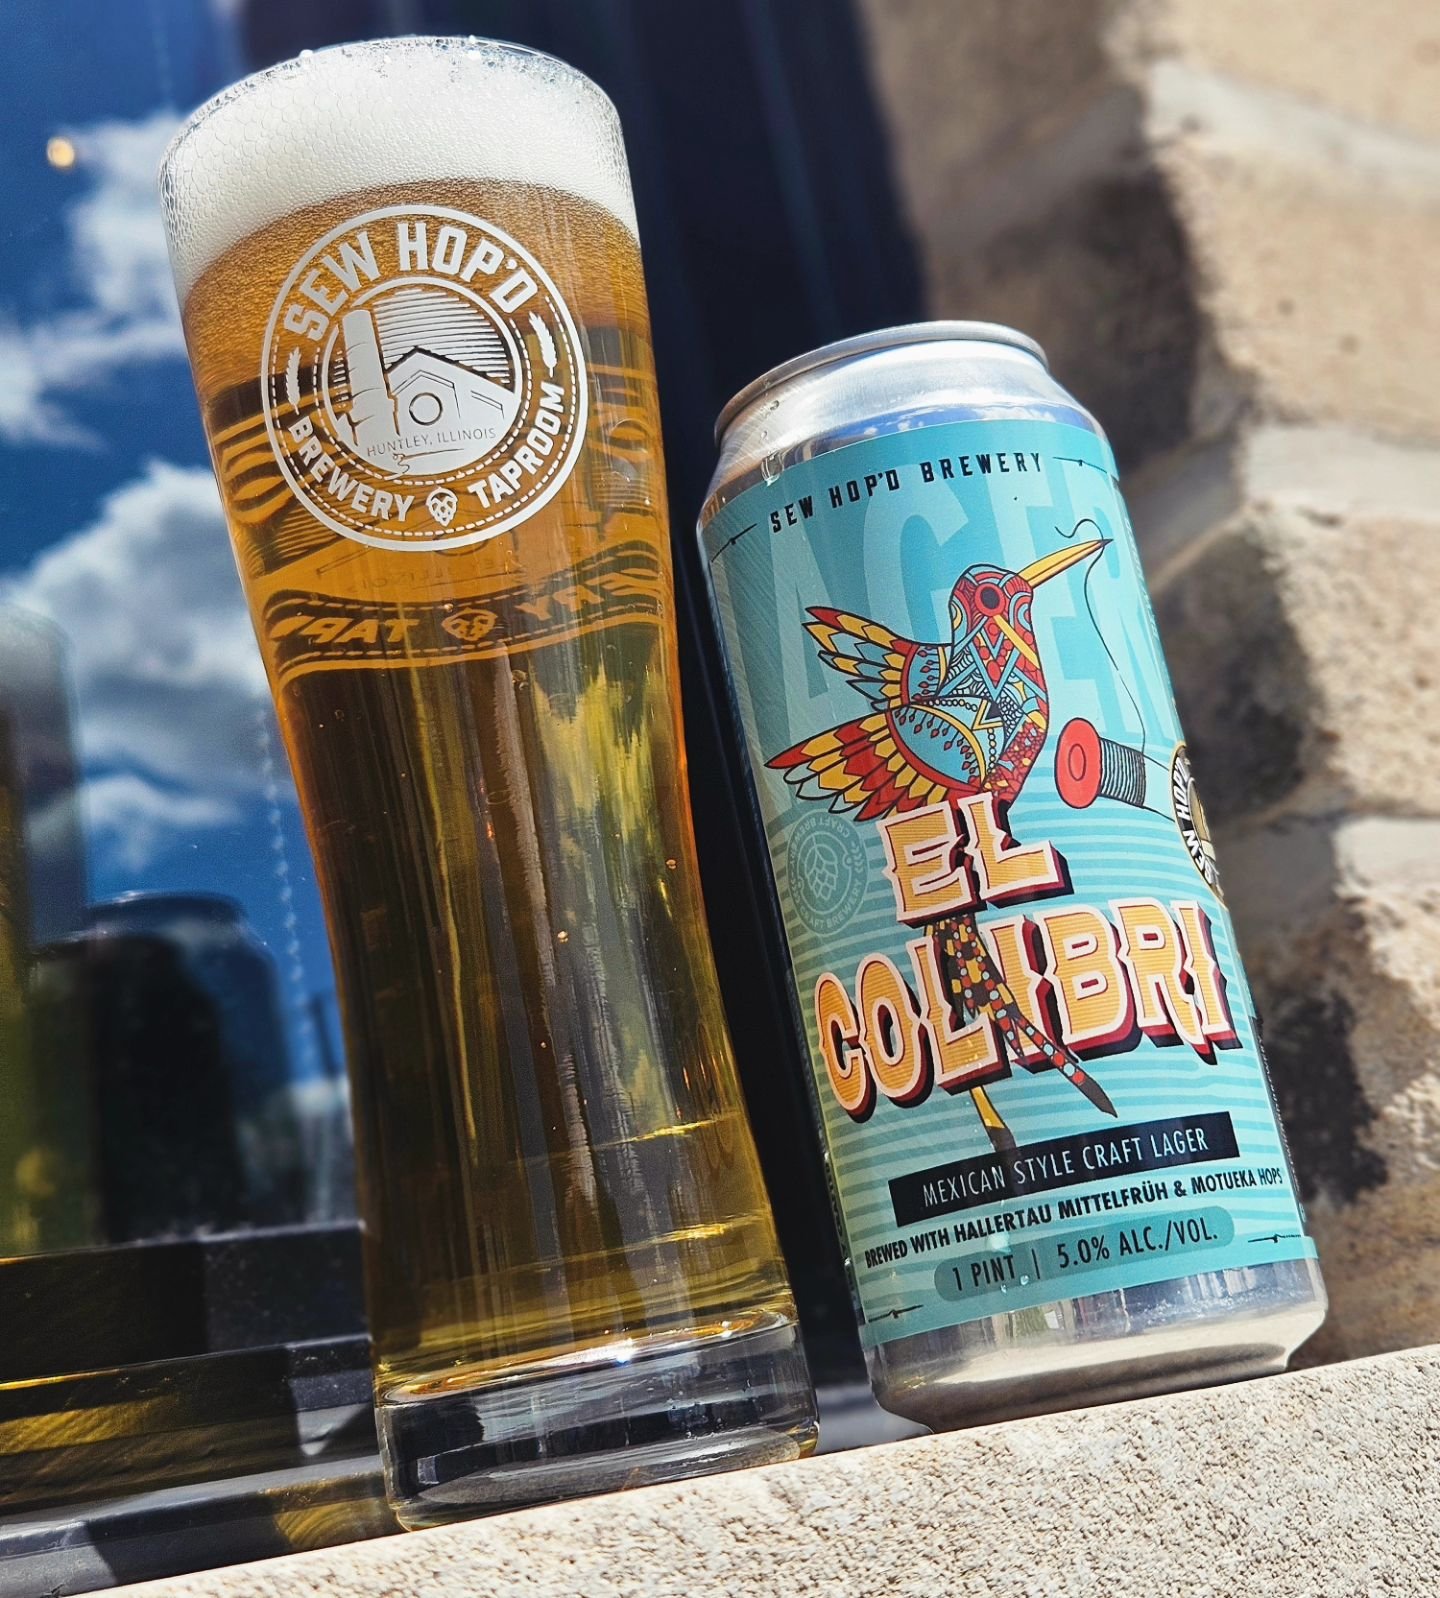 Just in time for patio season and this GORGEOUS weekend ahead, we have a Sew Hop'd seasonal favorite back on draft- El Colibri, the hummingbird, is a delectable handcrafted nectar made from the best hops and grains. Made with Hallertau Mittlefra&uuml